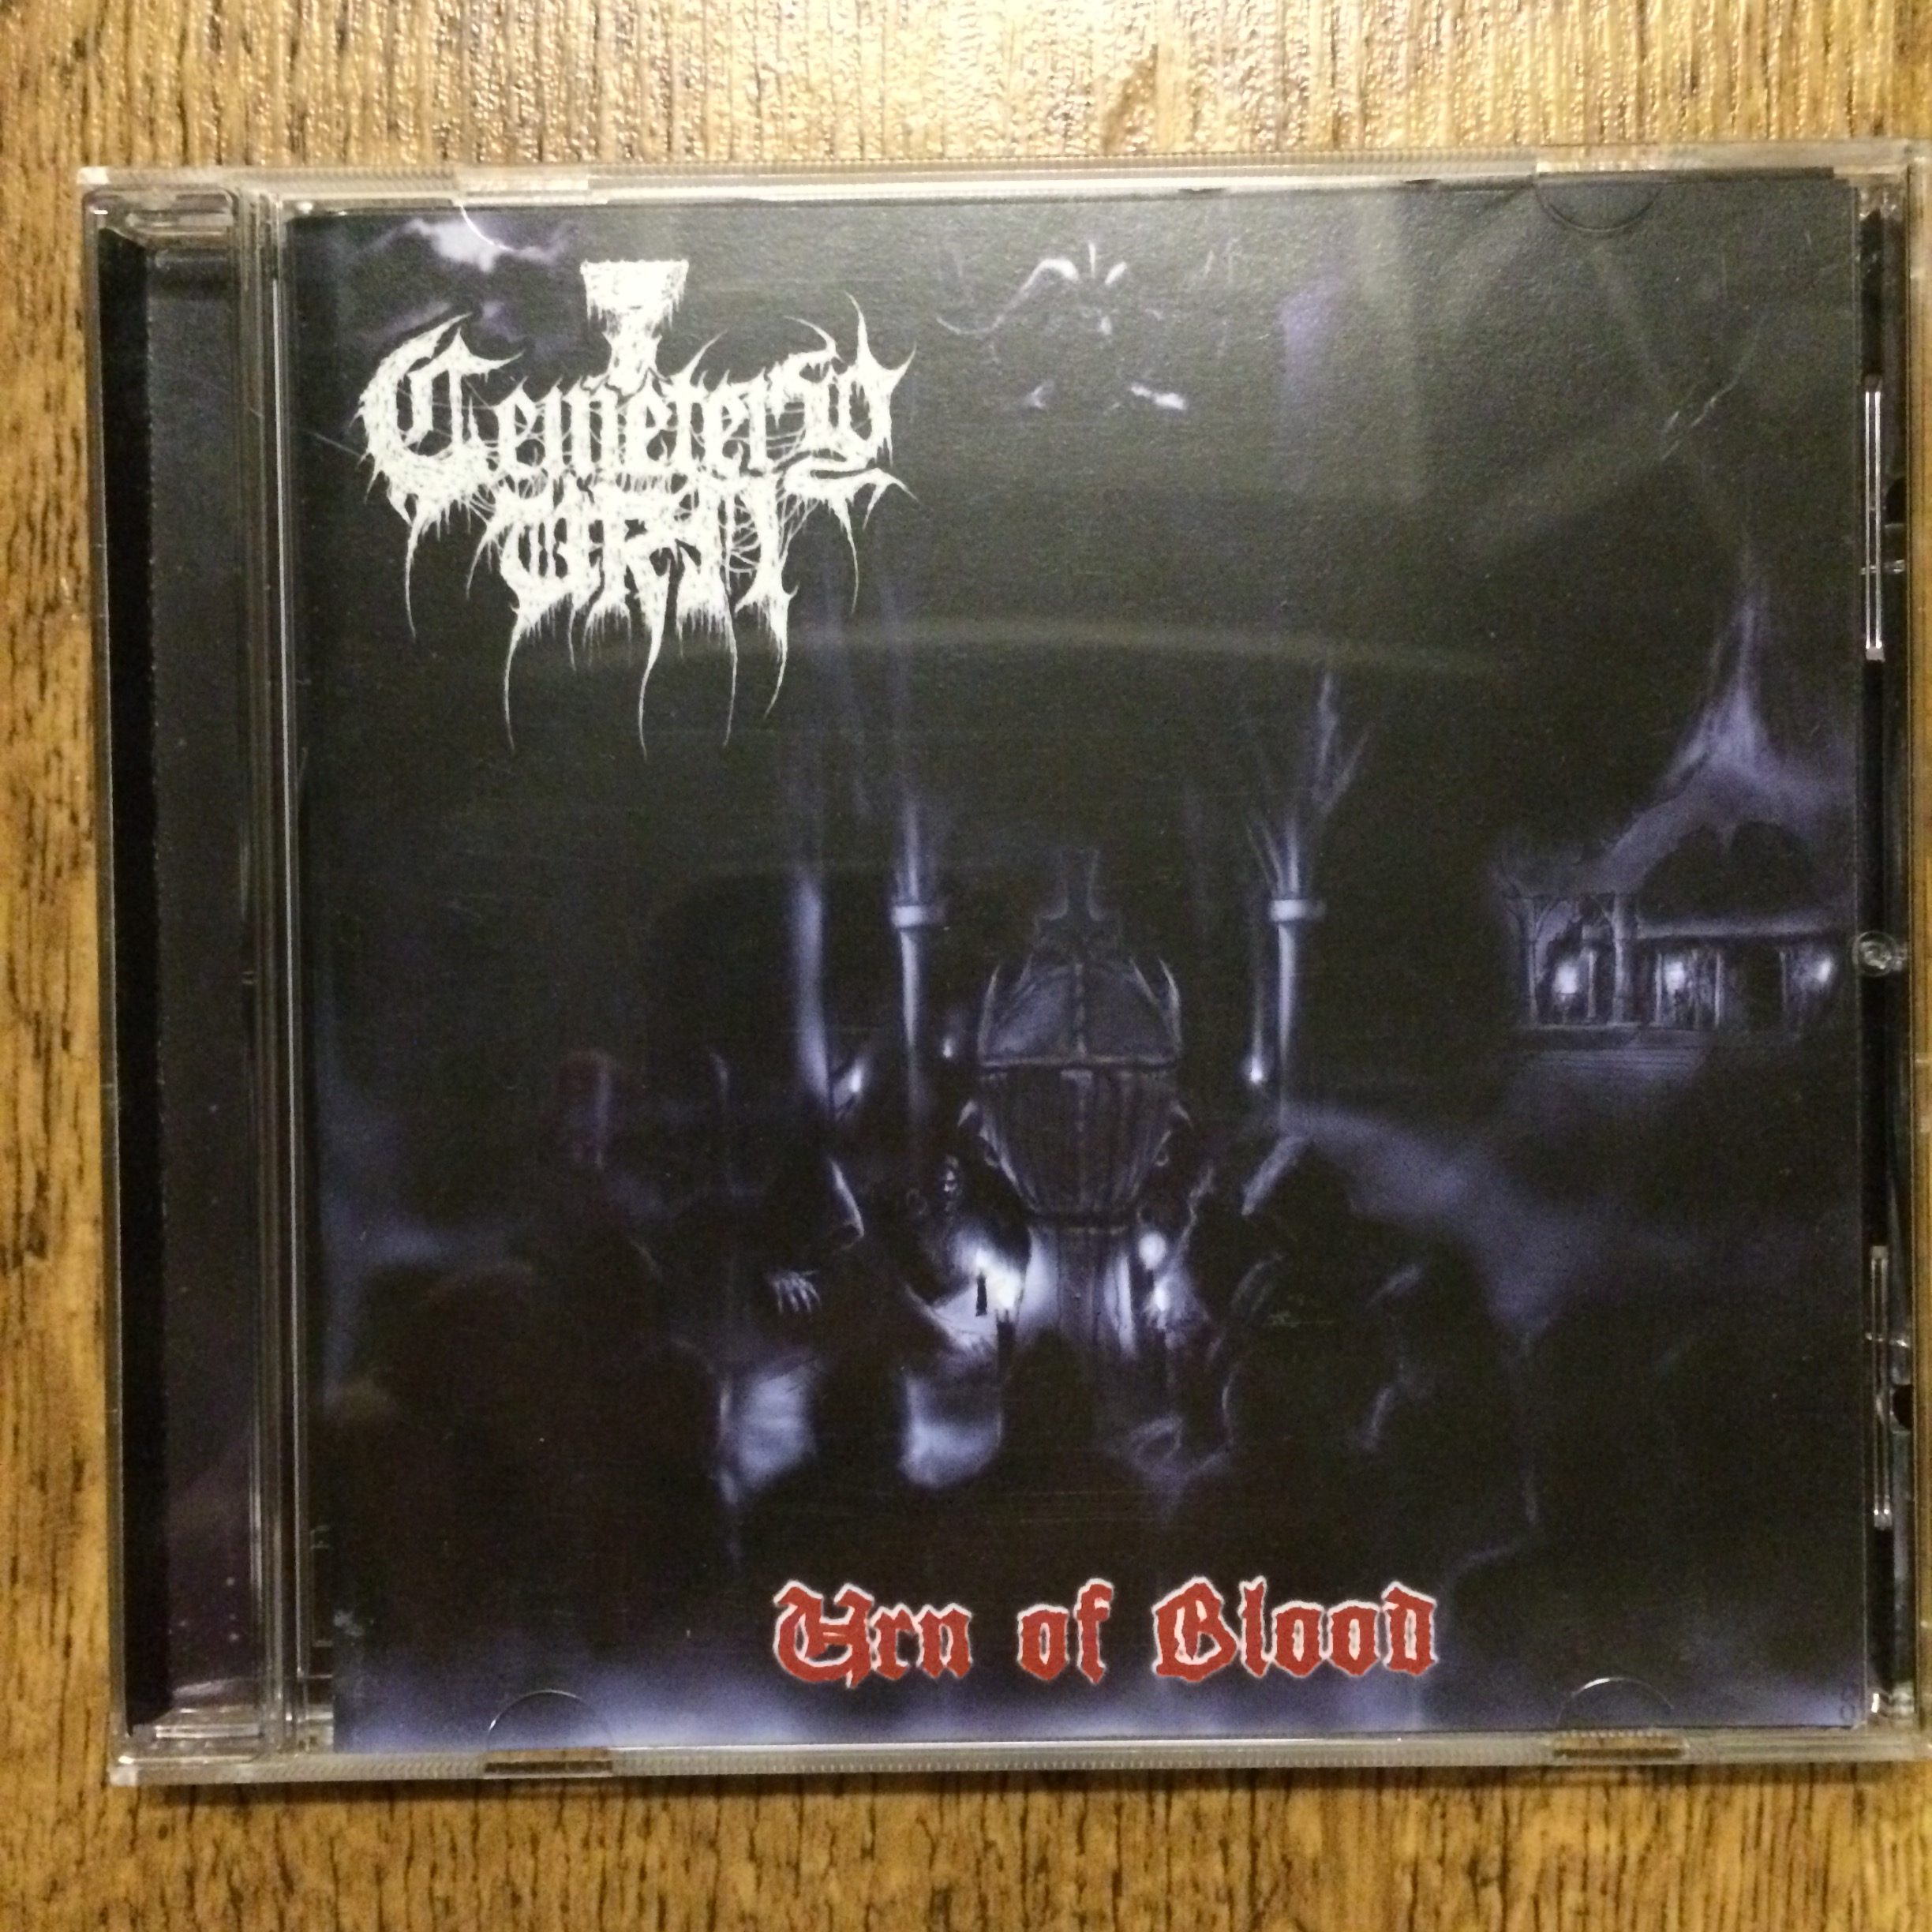 Photo of the Cemetery Urn - "Urn of Blood" CD